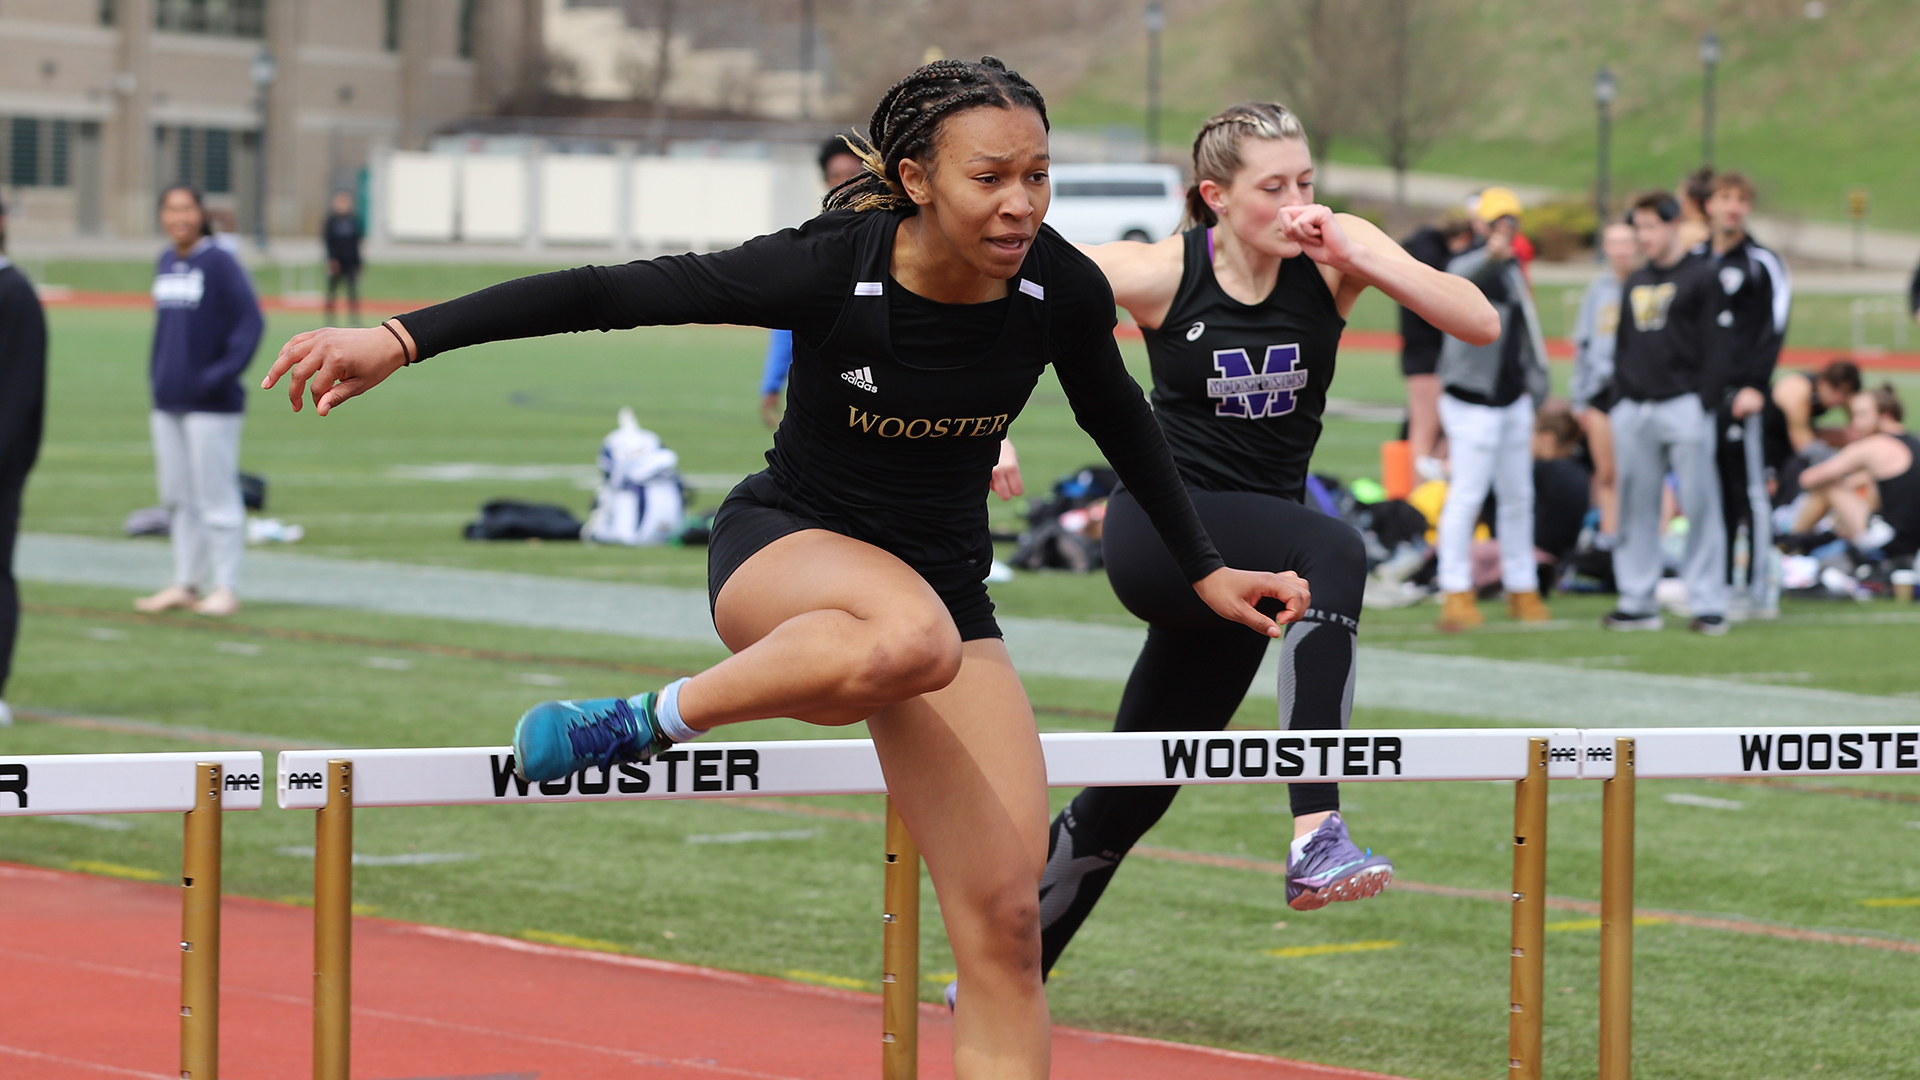 Daysia Hargrave, Wooster Track & Field